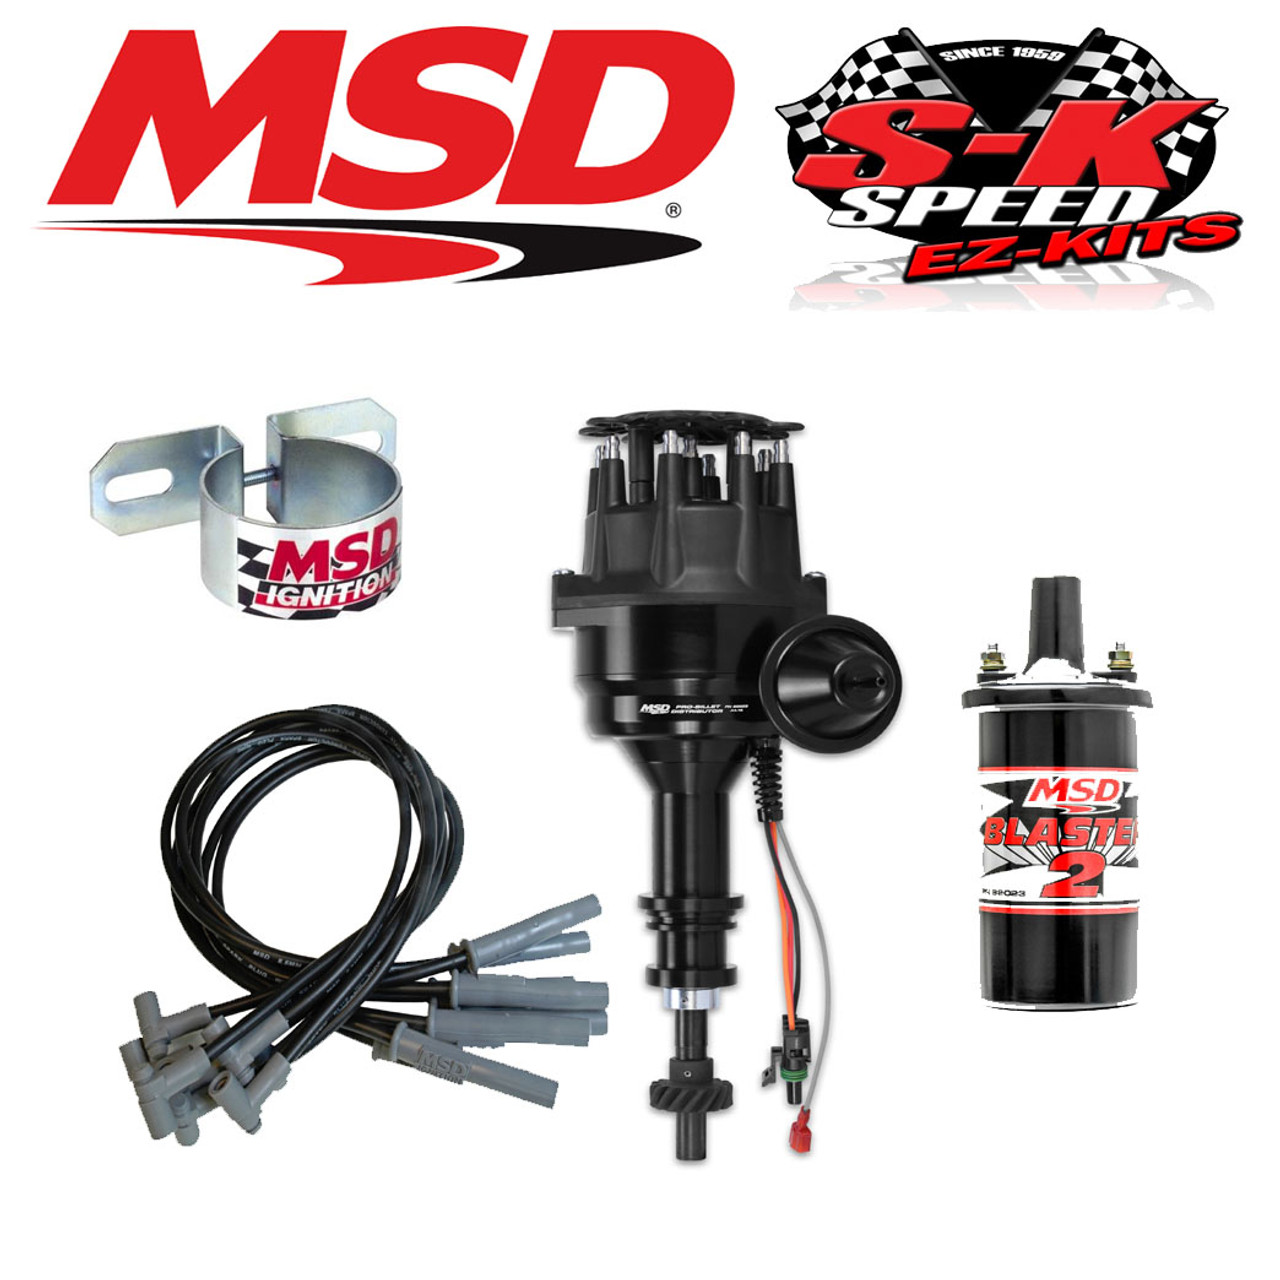 MSD 99063 Ignition Kit Ready to Run Distributor/Wires/Coil Ford 351C/400/429/460